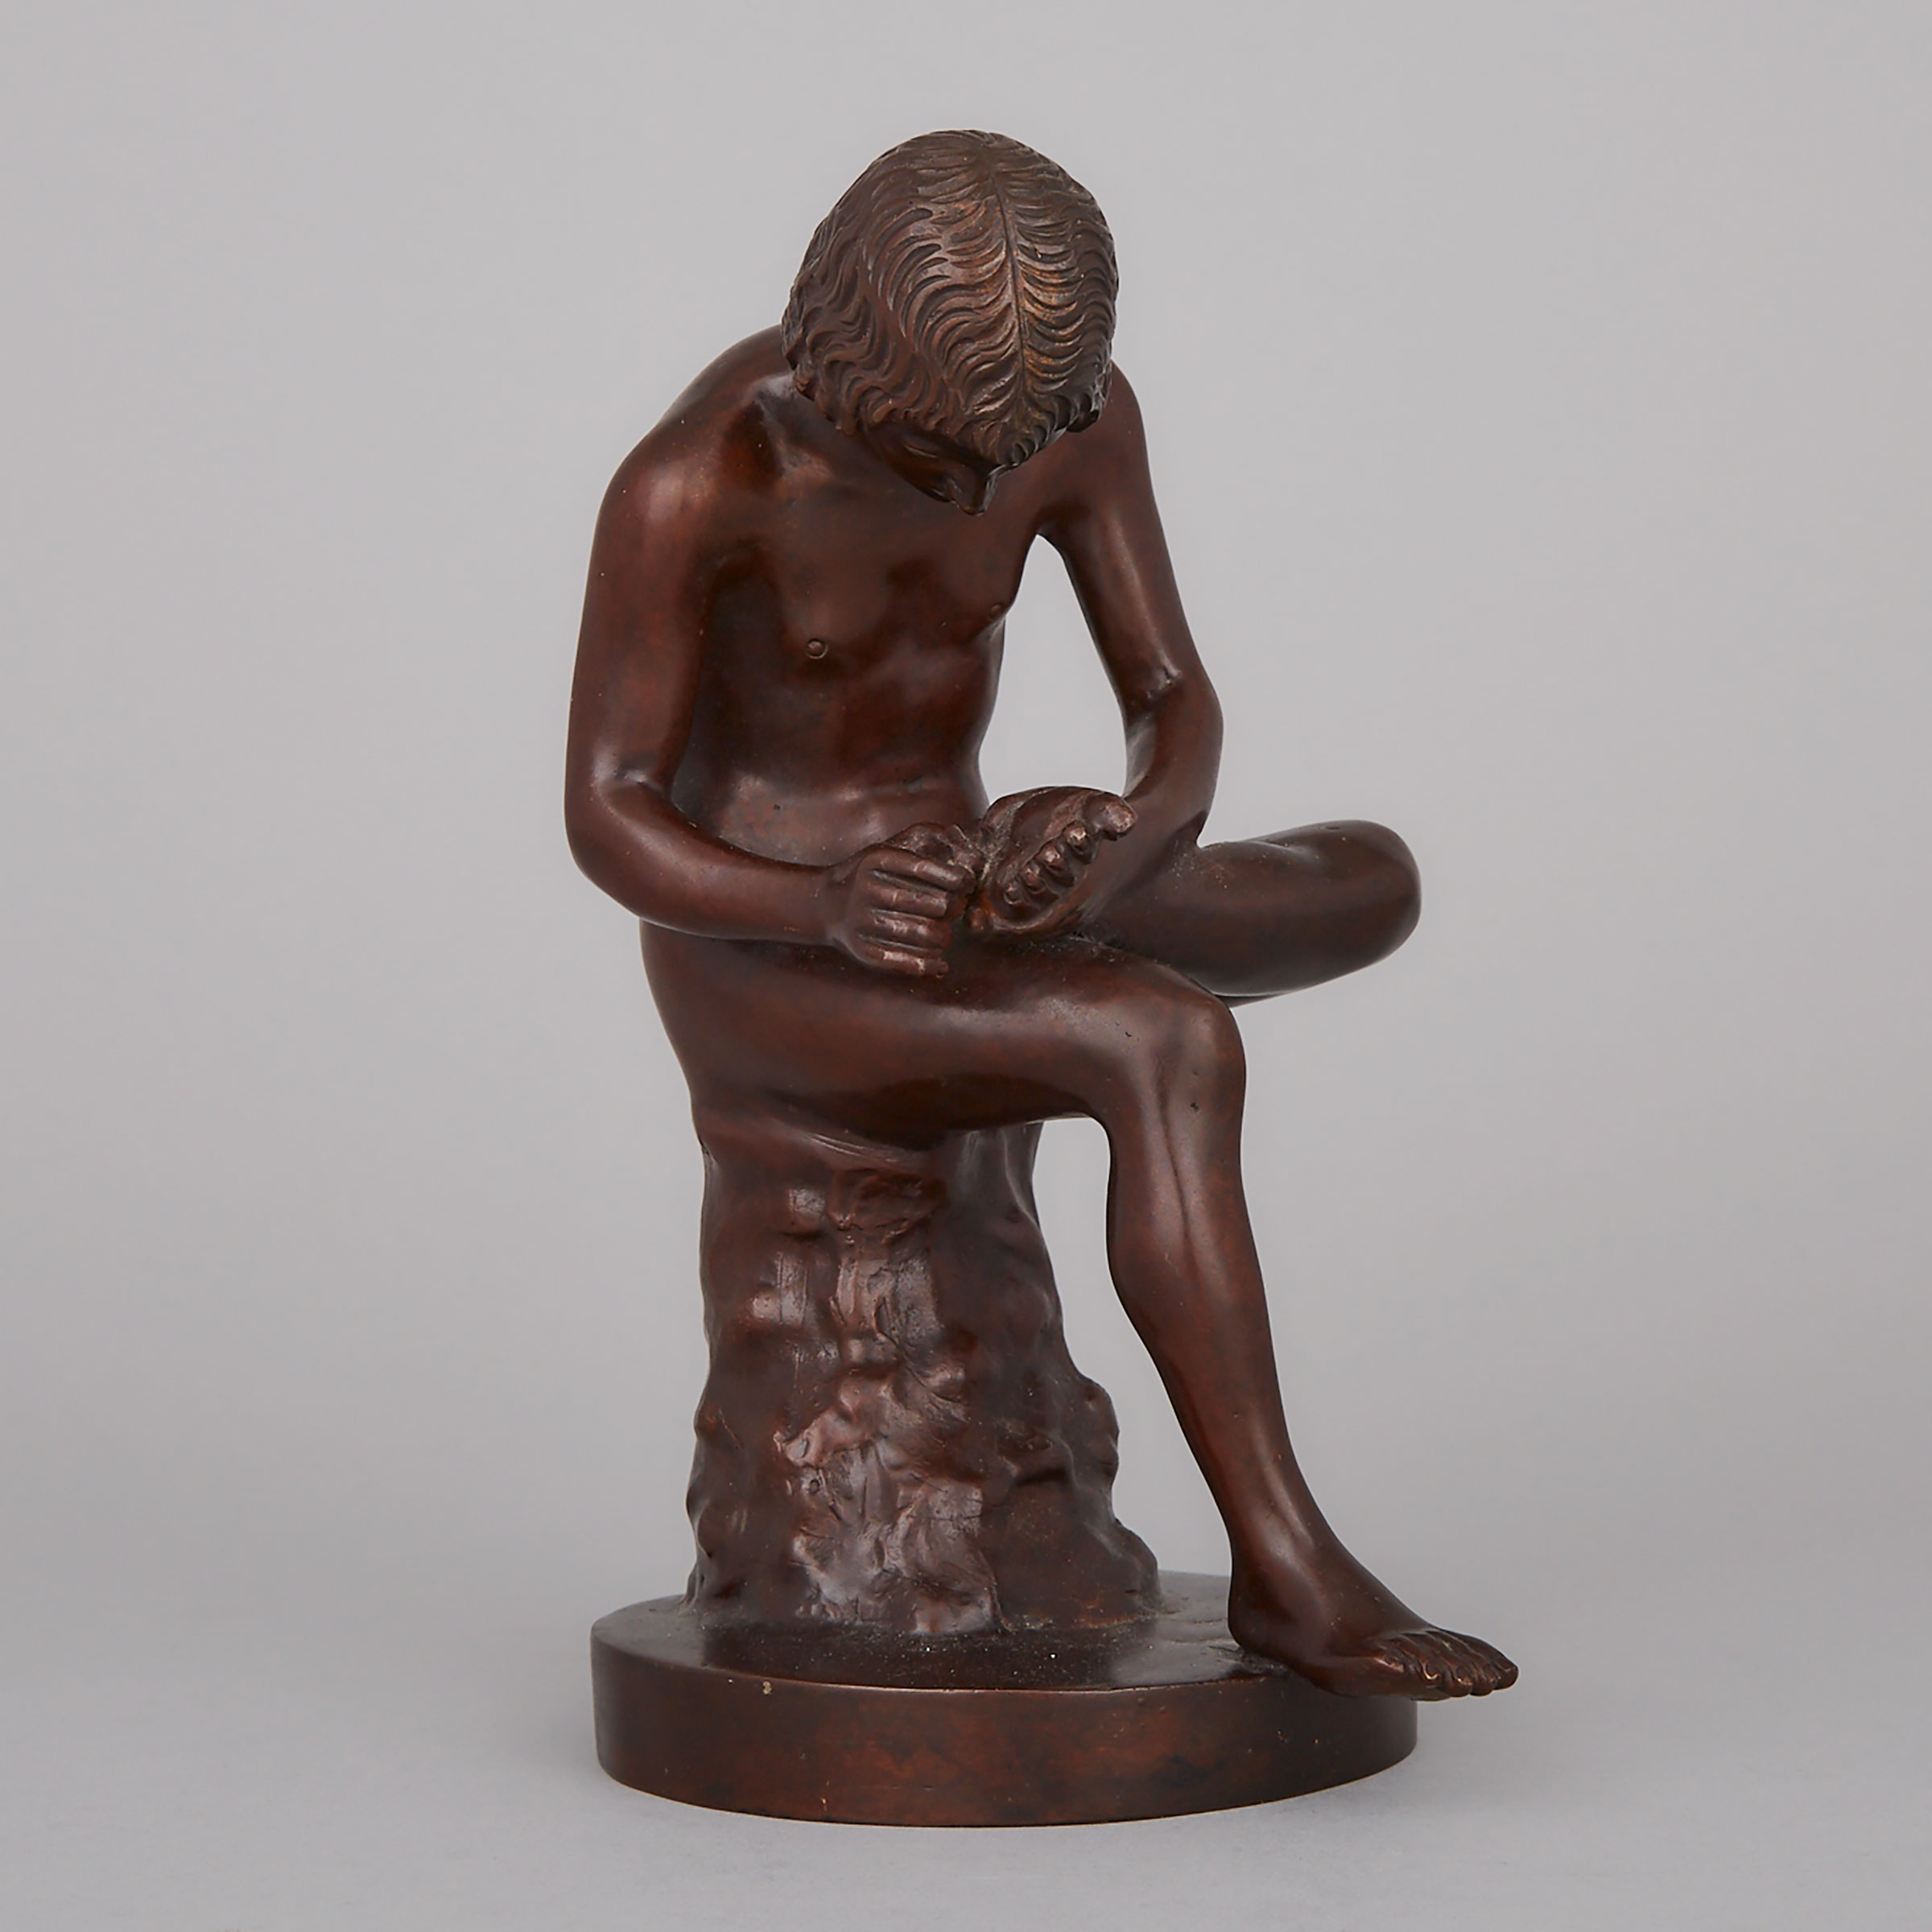 Italian Bronze Figure of Spinario (Boy with Thorn), After the Greco-Roman Ancient, 20th century